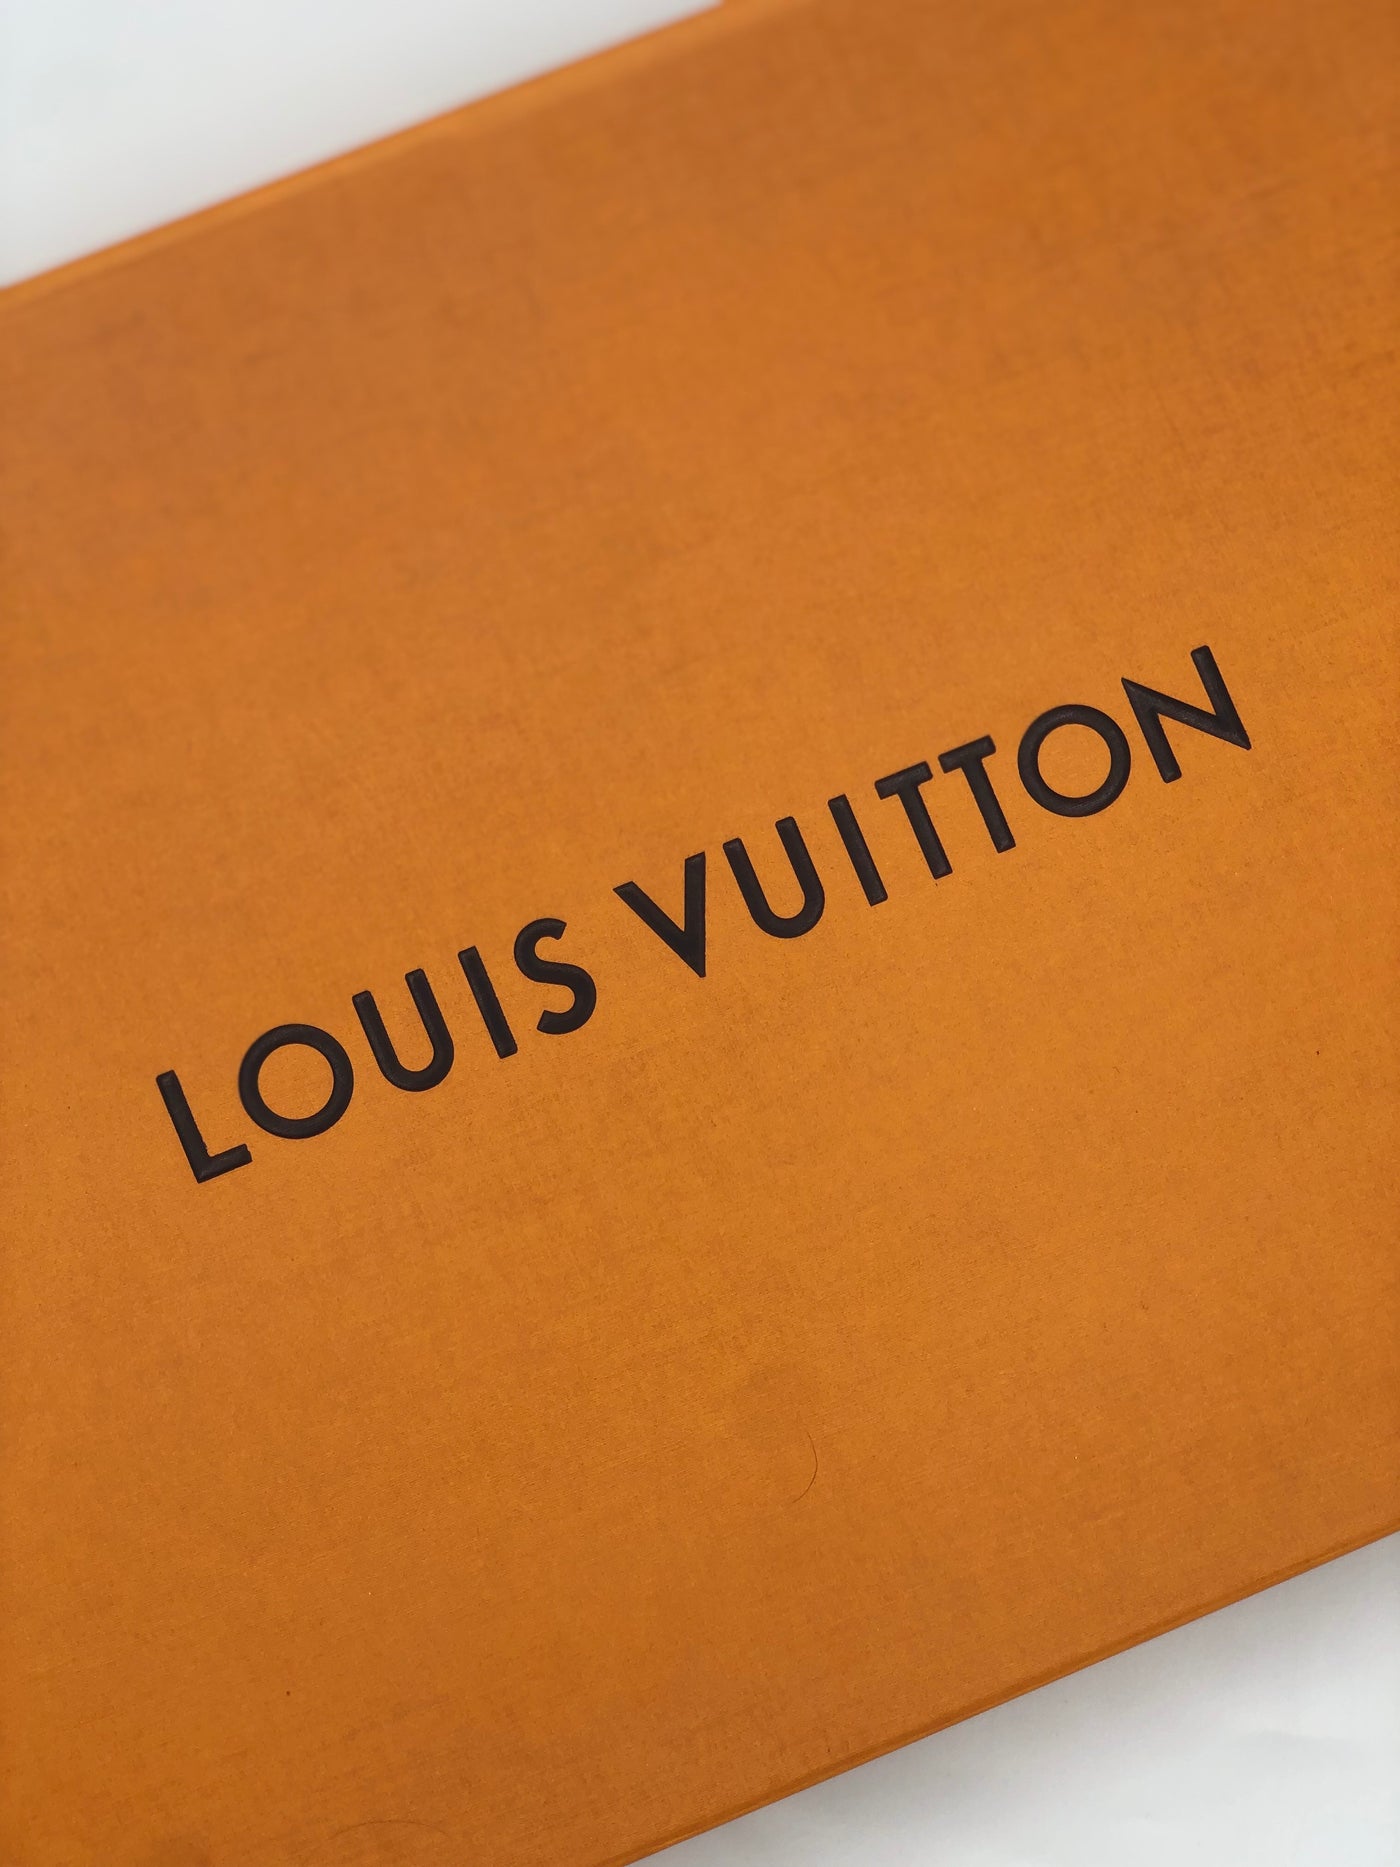 LOUIS VUITTON blue Shawl with box RRP: £450